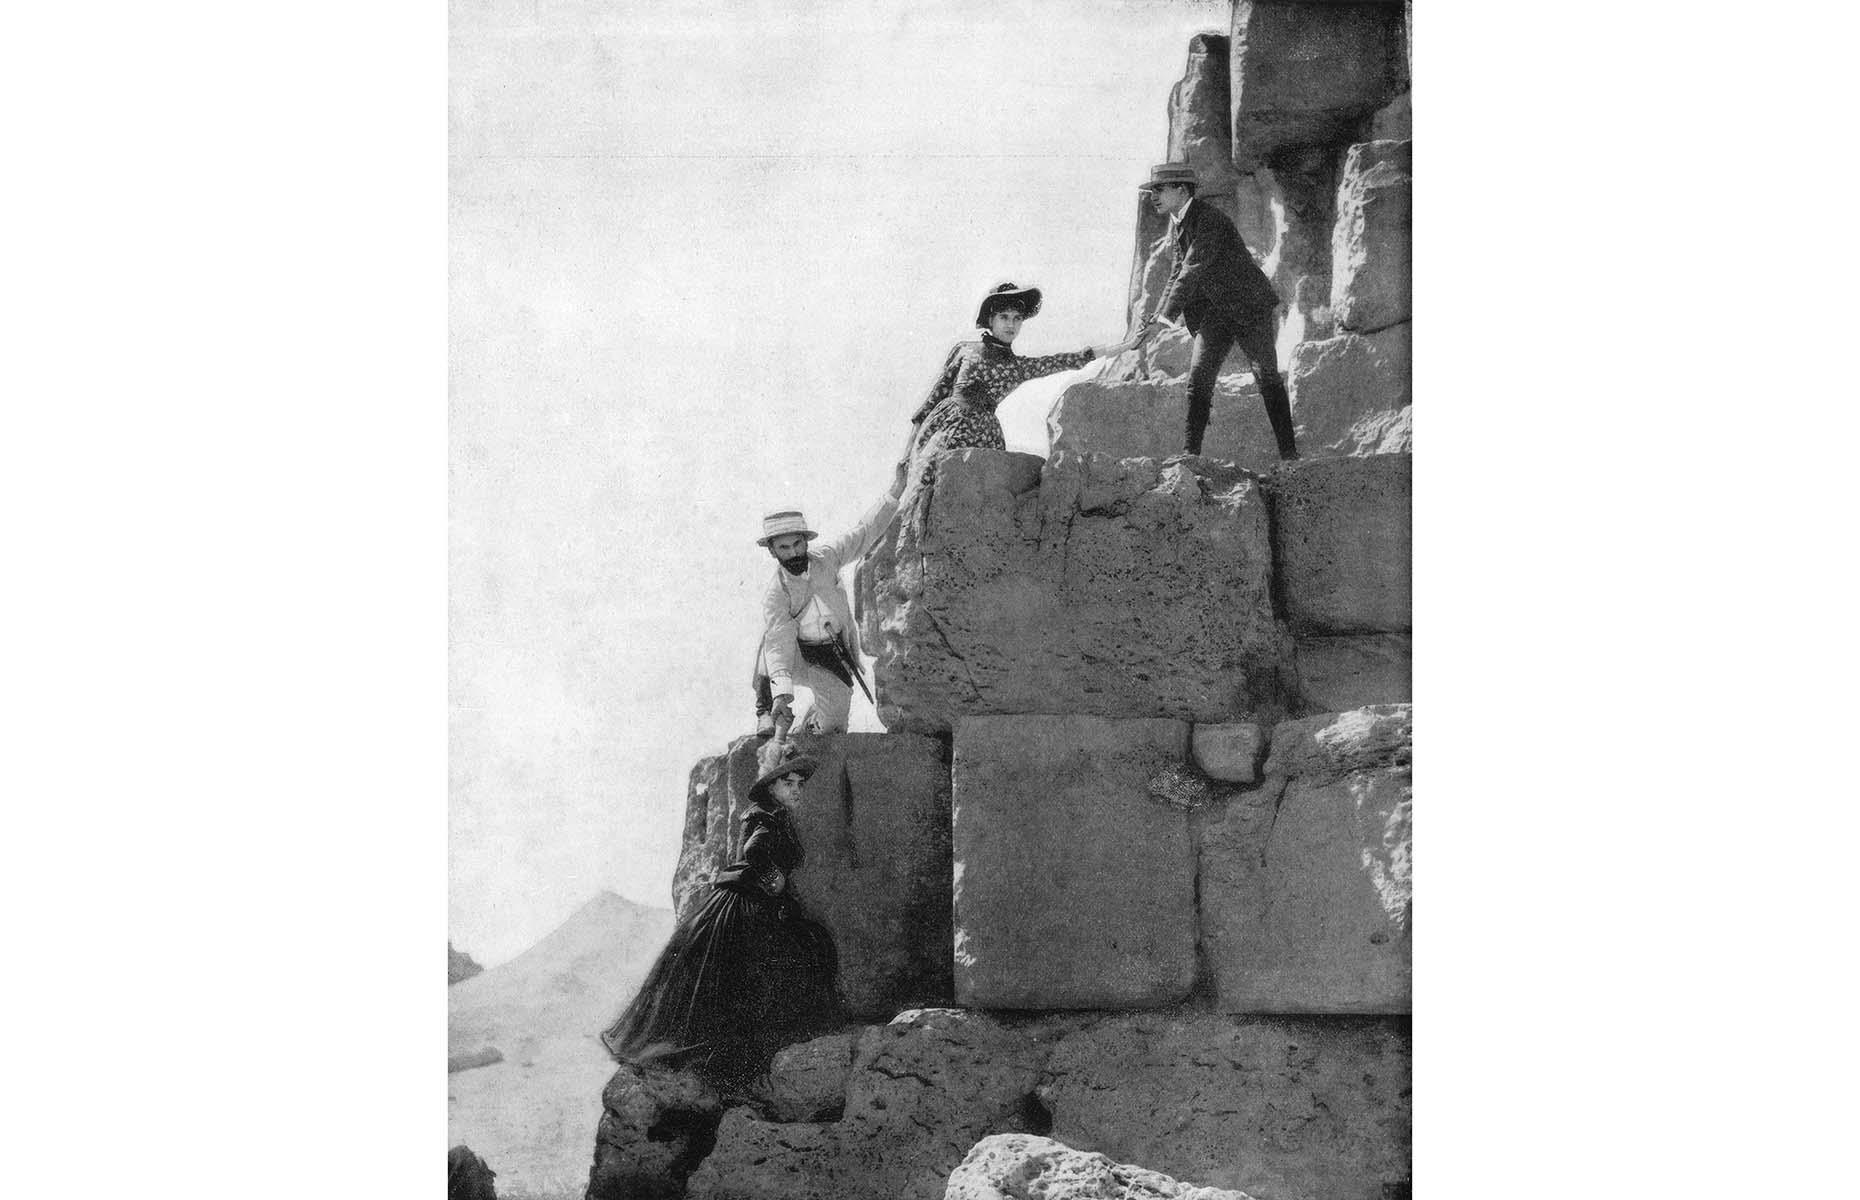 <p>At the time there were no rules protecting the ancient monuments so it wasn't unusual to see street vendors selling off mummies and various trinkets from the tombs. Sometimes visitors would even climb the pyramids, bringing a picnic with them and spending hours sunbathing or taking tea. Here a group of Victorian vacationers (circa 1899) are making their way up the Great Pyramid in Giza.</p>  <p><a href="http://bit.ly/3roL4wv"><strong>Love this? Follow our Facebook page for more travel inspiration</strong></a></p>